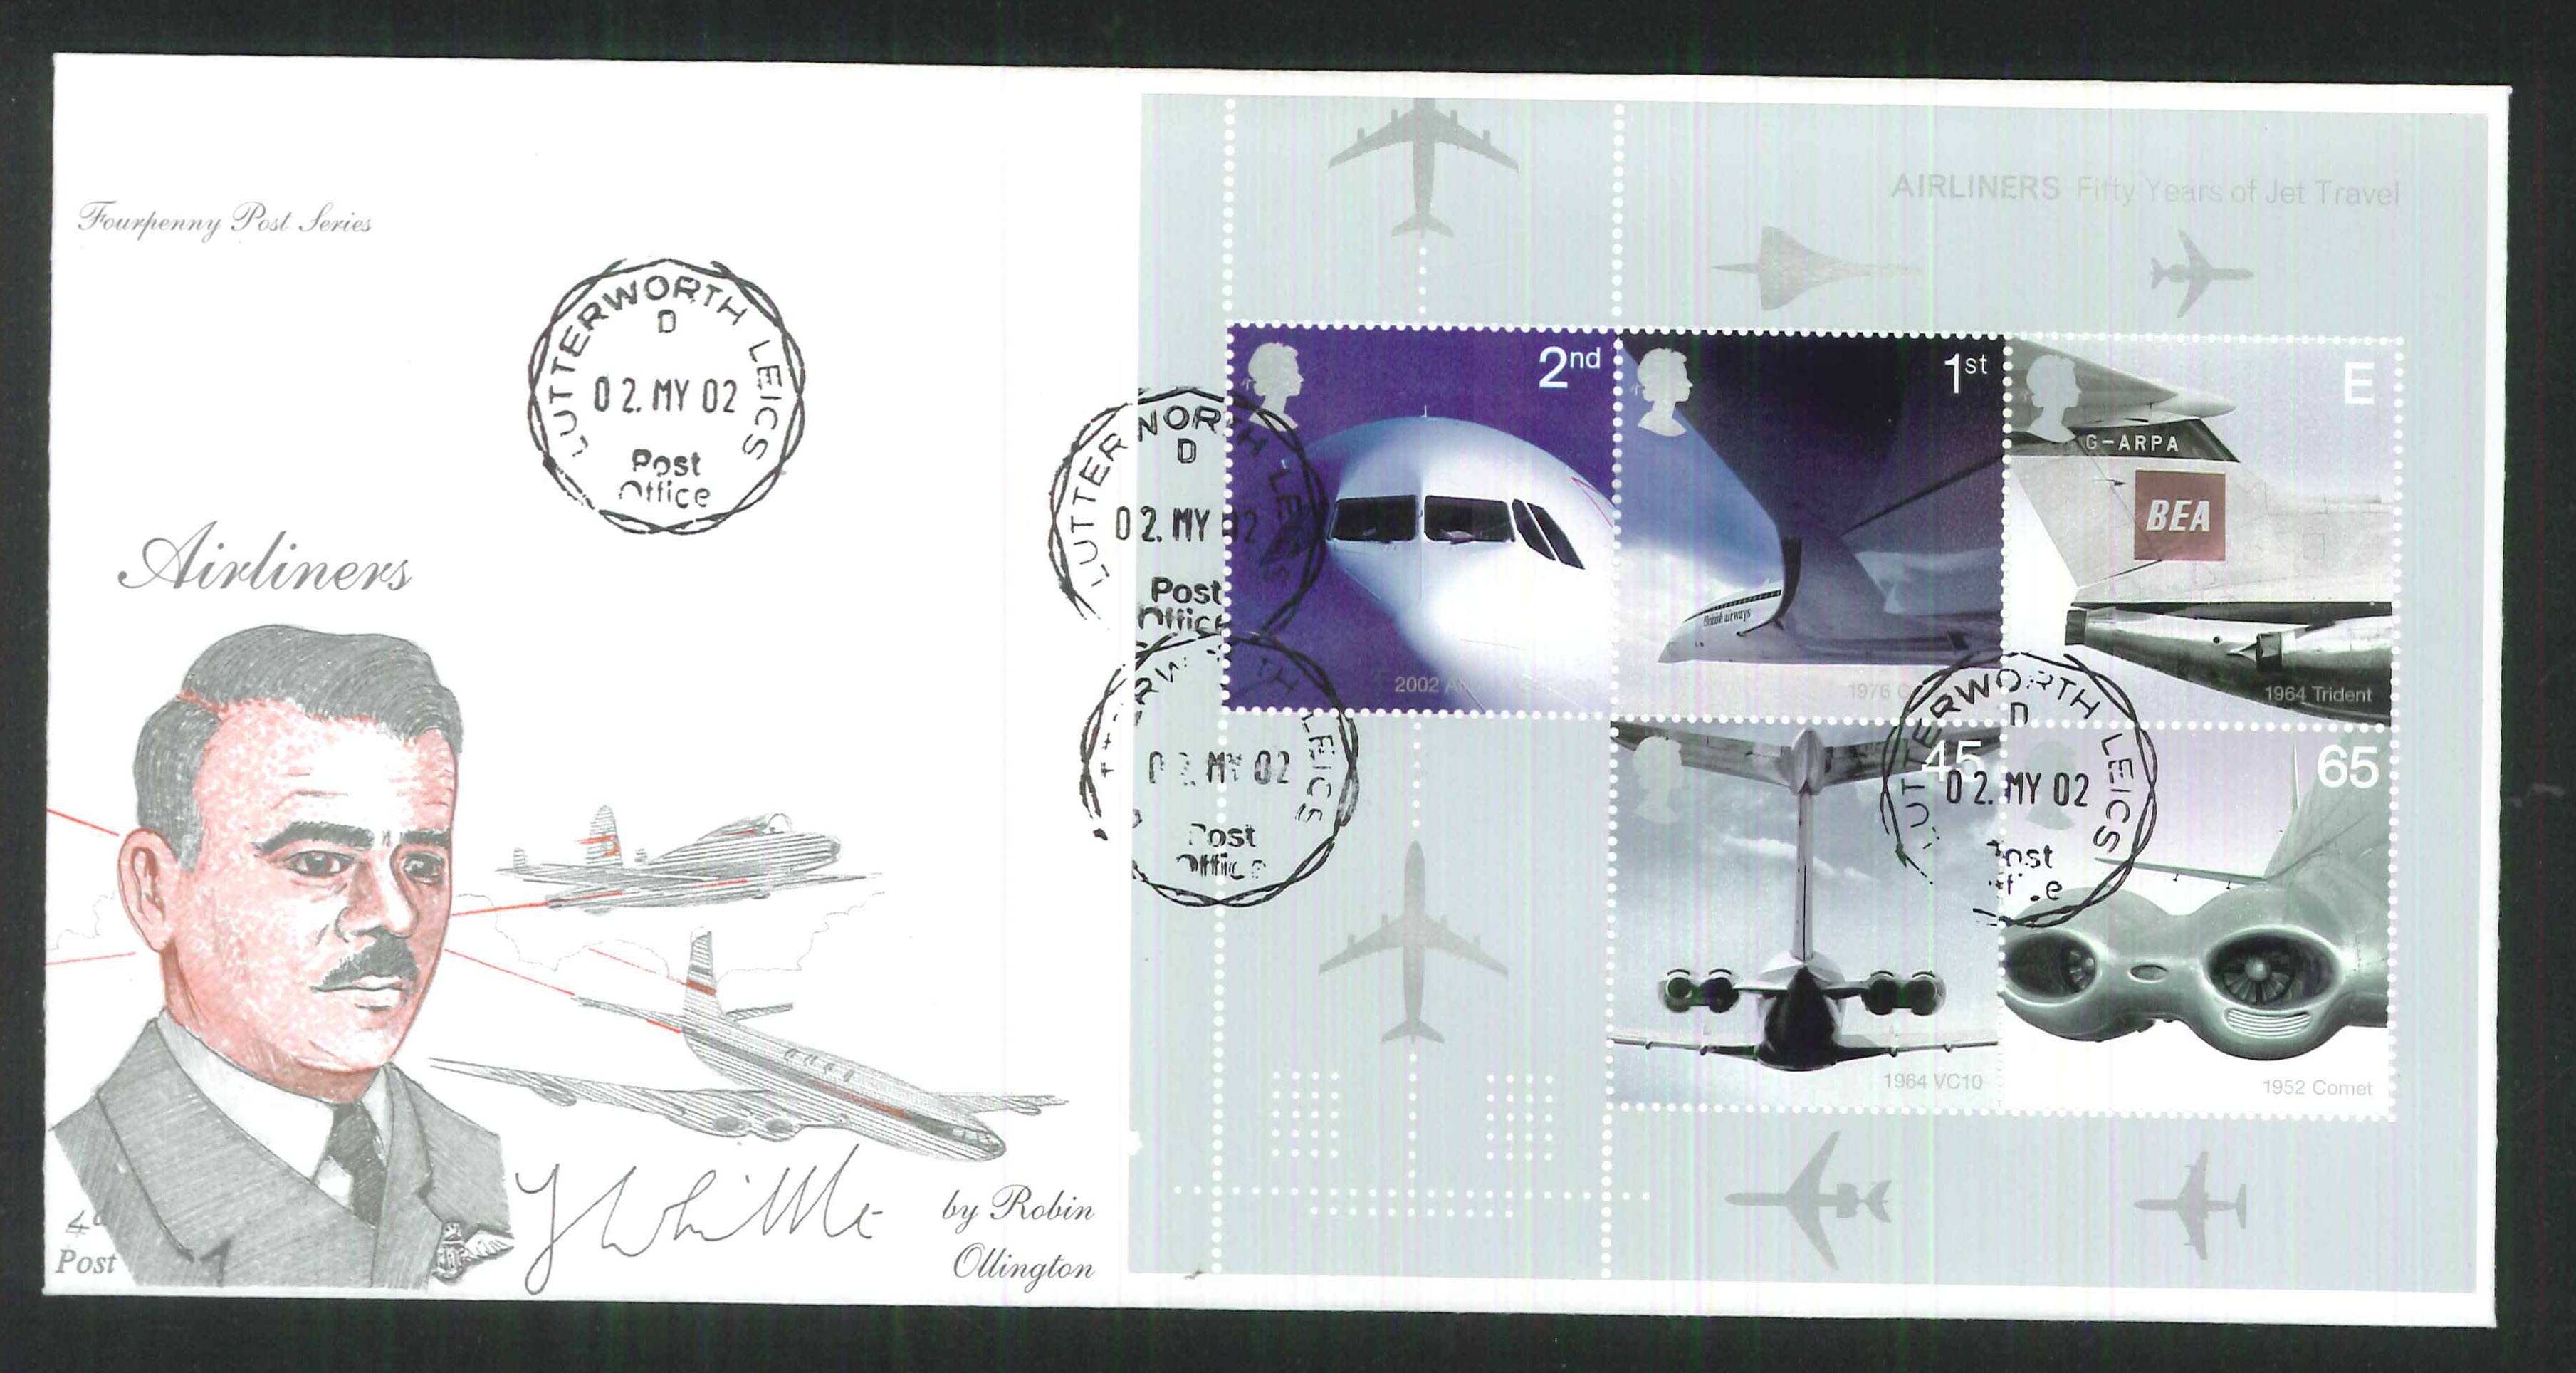 2002 -Airliners Mini Sheet -Lutterworth Leics C D S Postmark - Click Image to Close